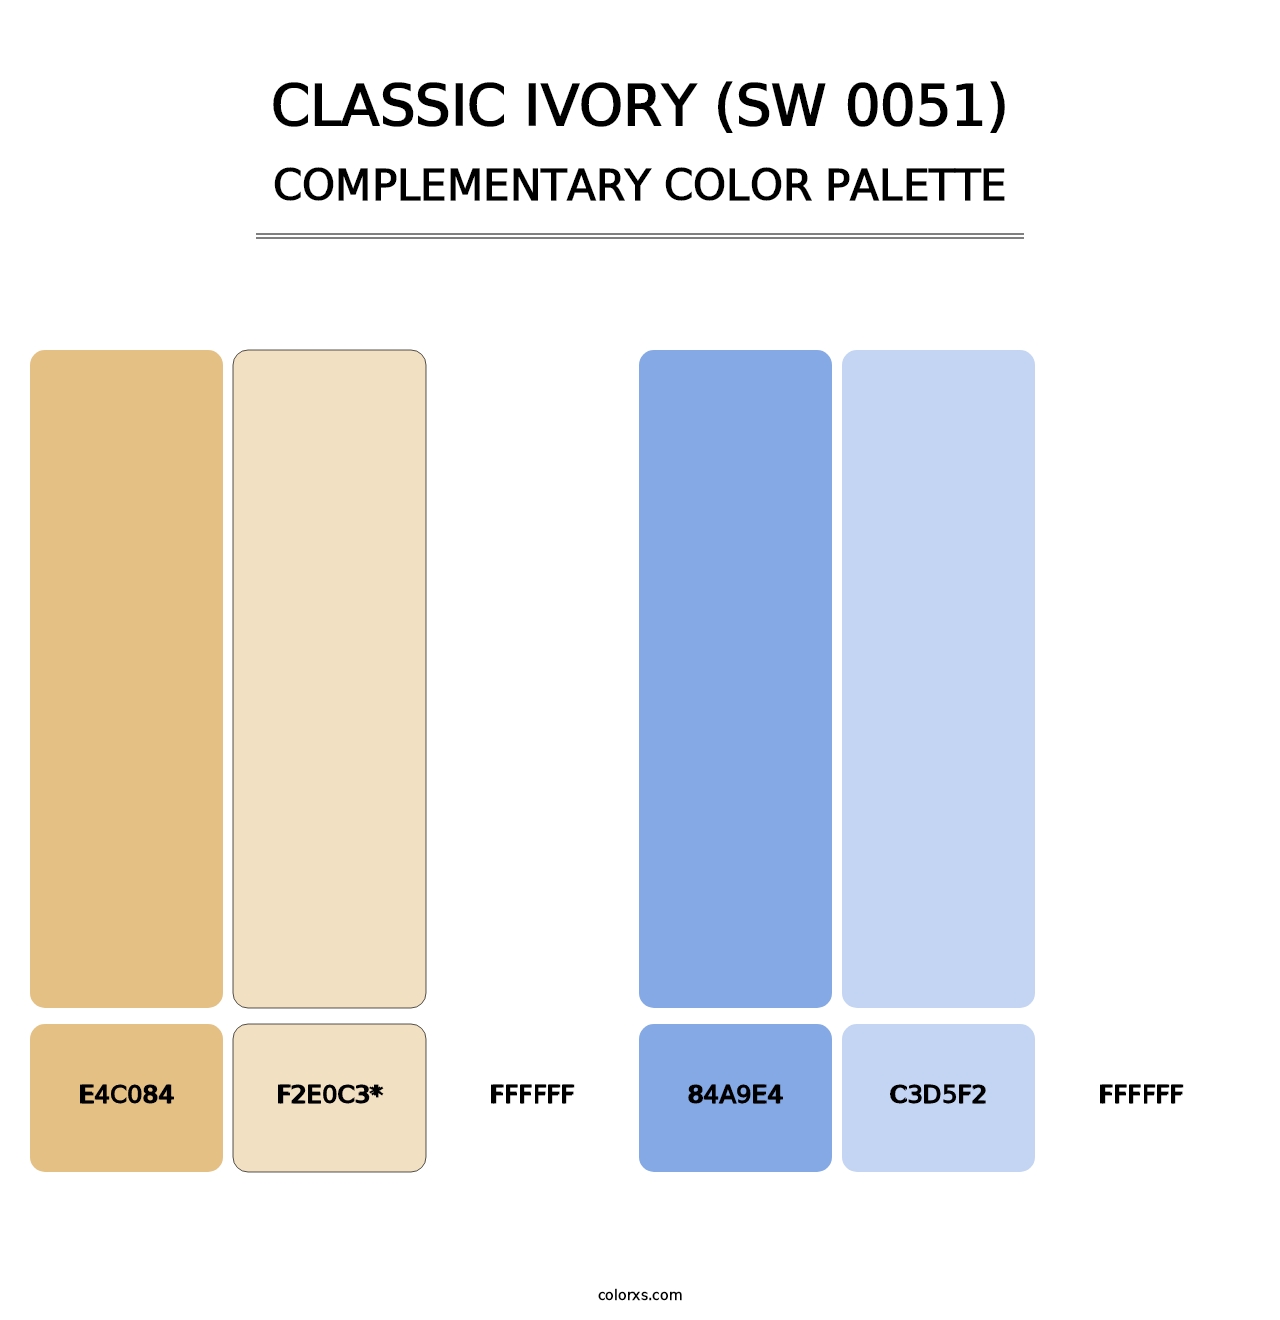 Classic Ivory (SW 0051) - Complementary Color Palette